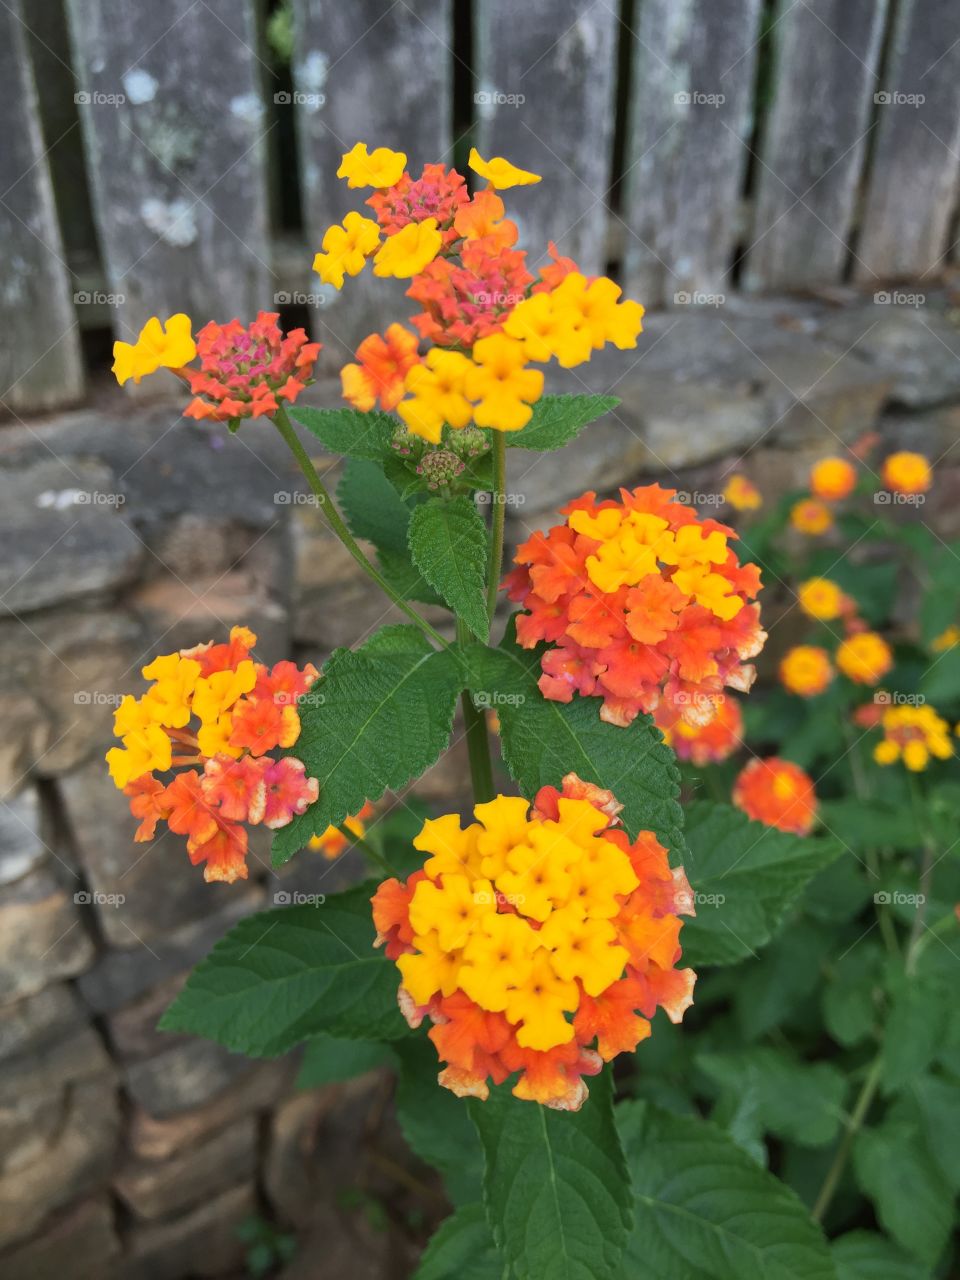 Elevated view of lantana flower